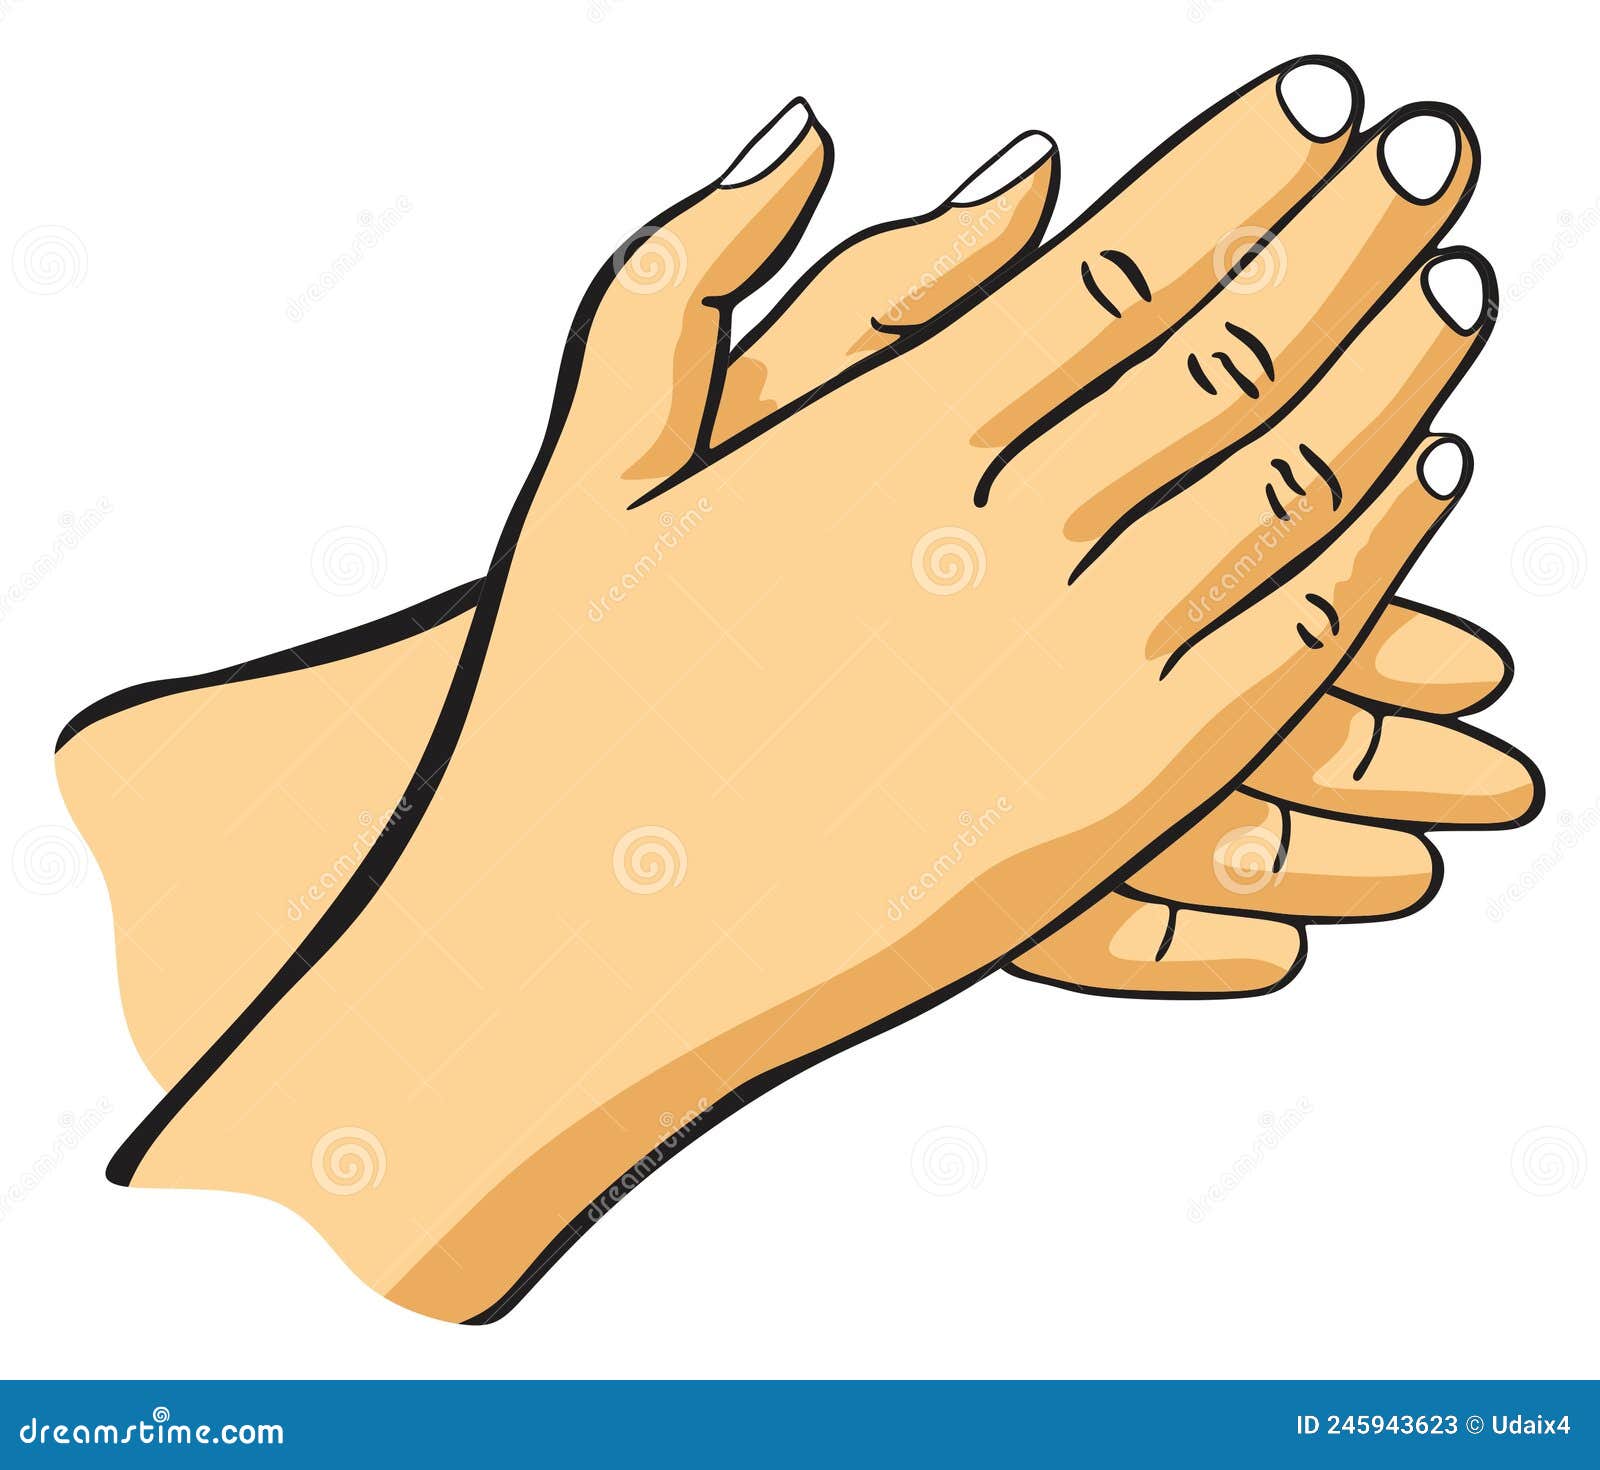 pair of right and left human hands clapping or rubbing or washing drawing concept